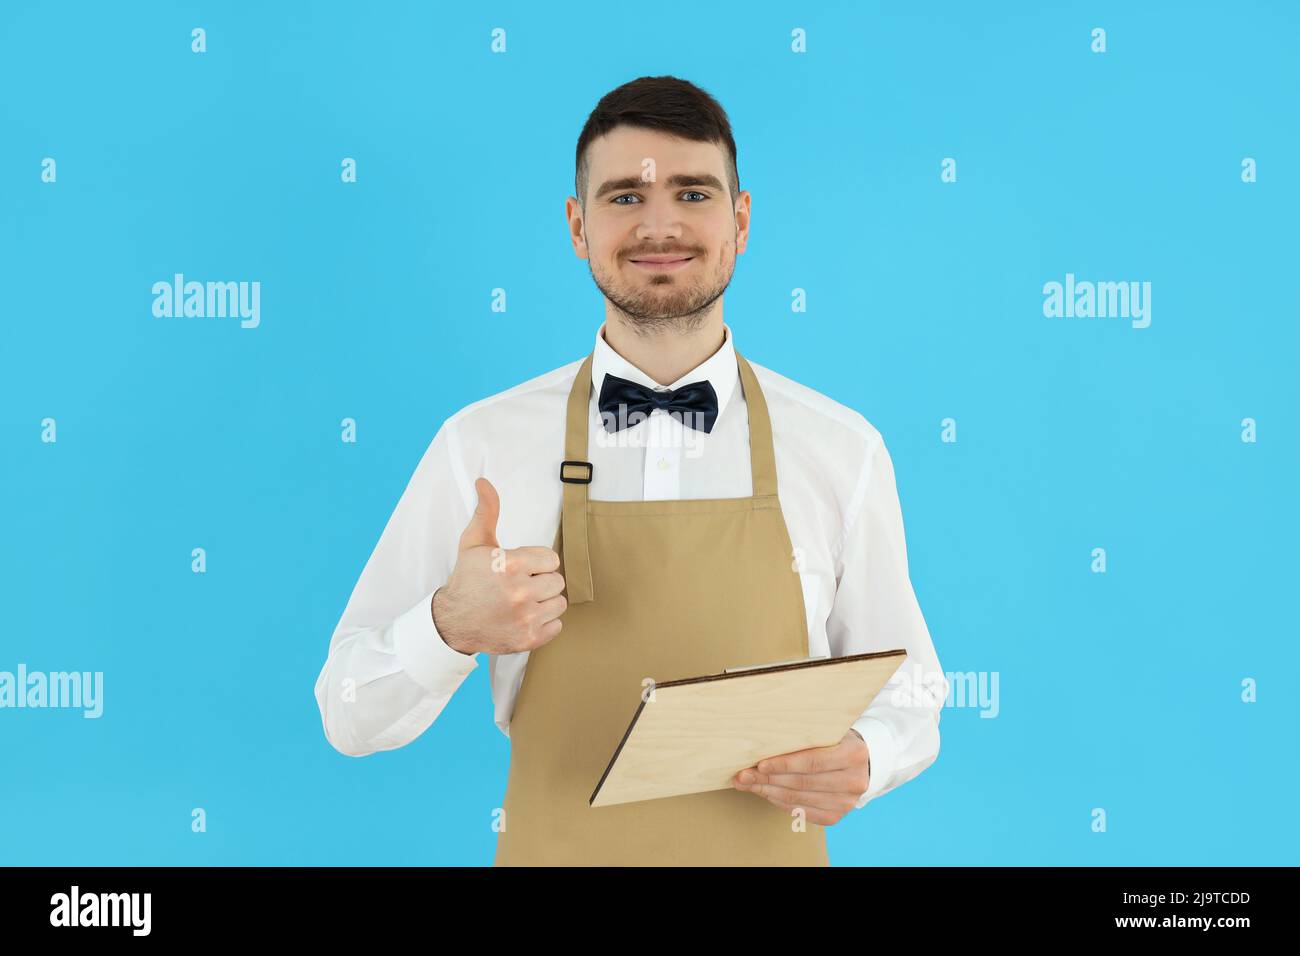 Concept of occupation, young waiter on blue background Stock Photo